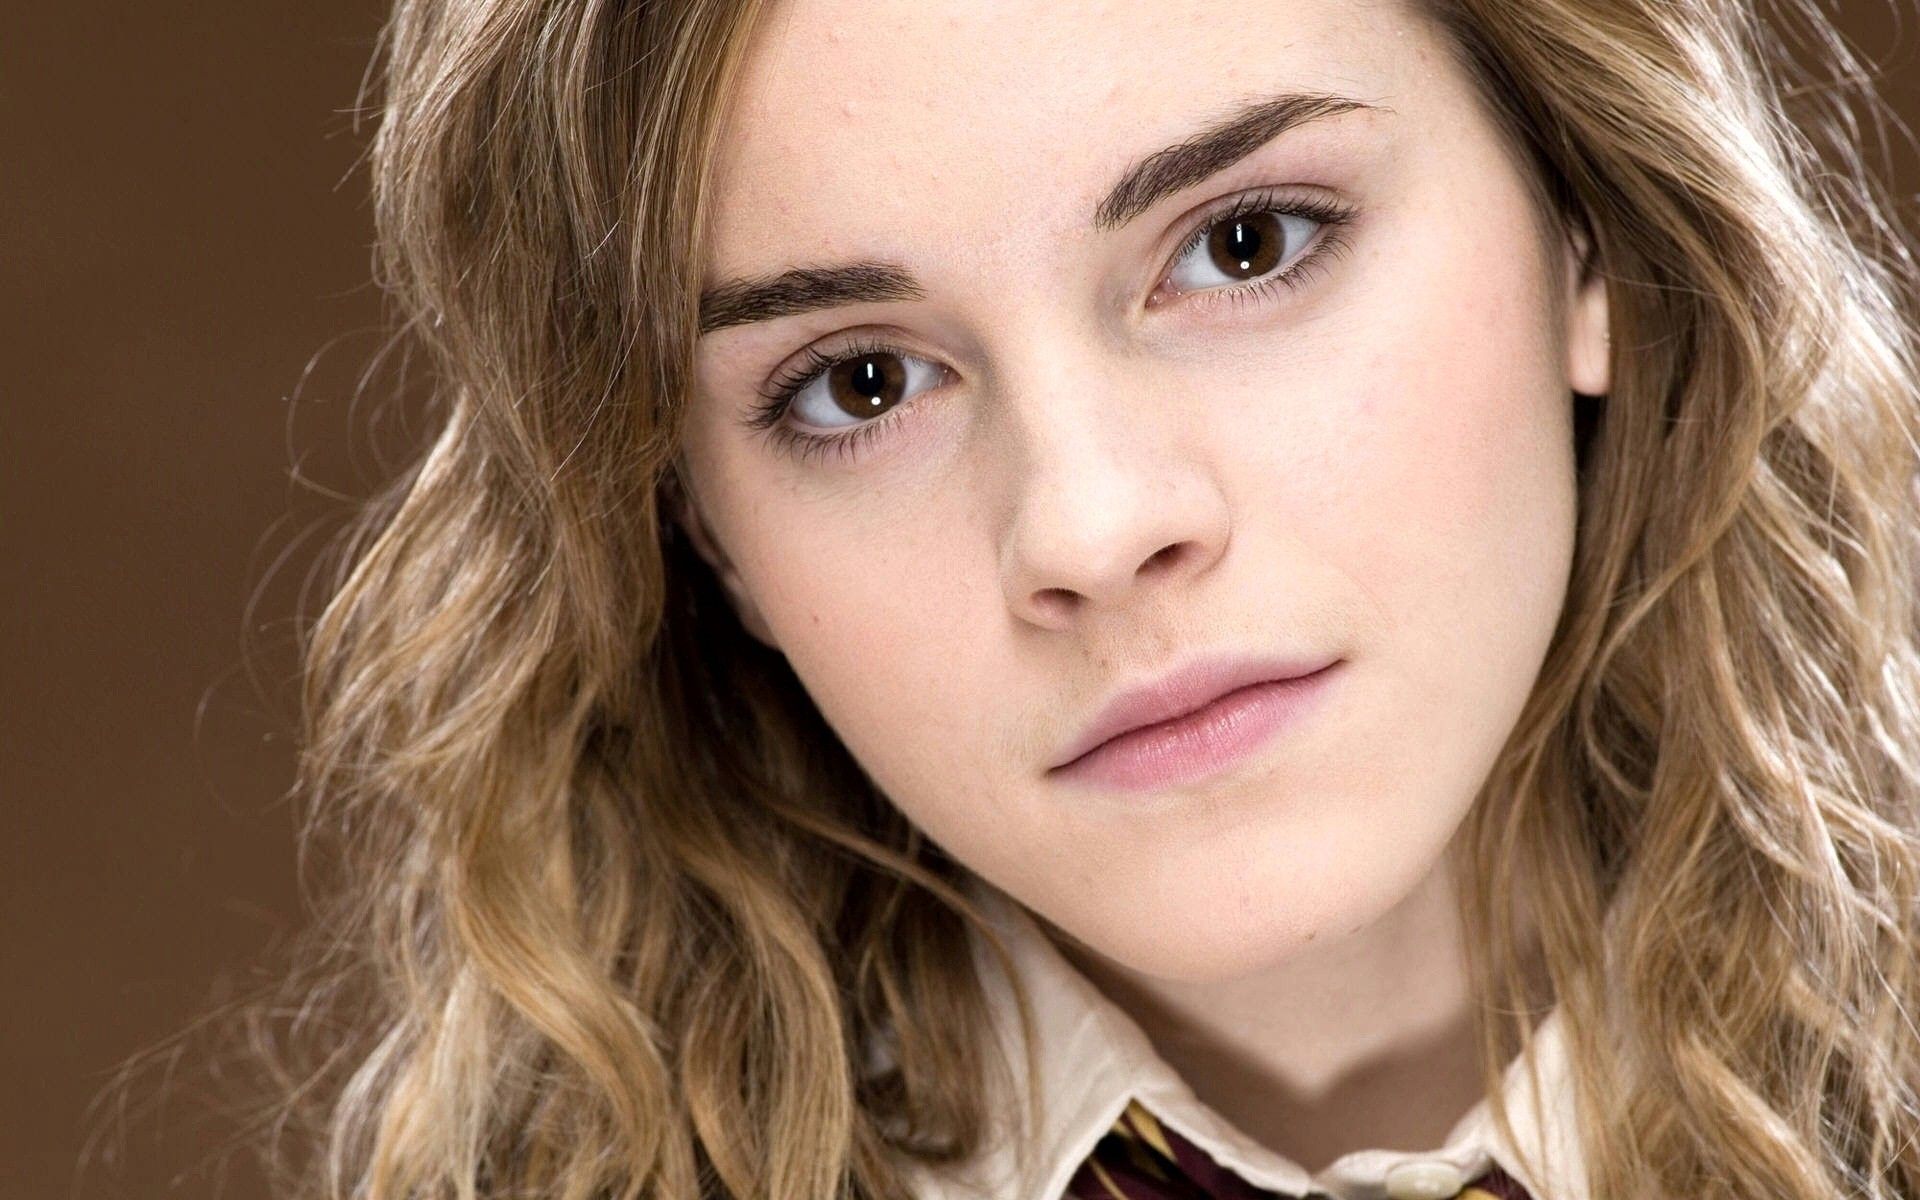 Free download Face of Emma Watson English Actress HD Photo HD Famous Wallpaper [1920x1200] for your Desktop, Mobile & Tablet. Explore The Name Emma Wallpaper. The Name Emma Wallpaper